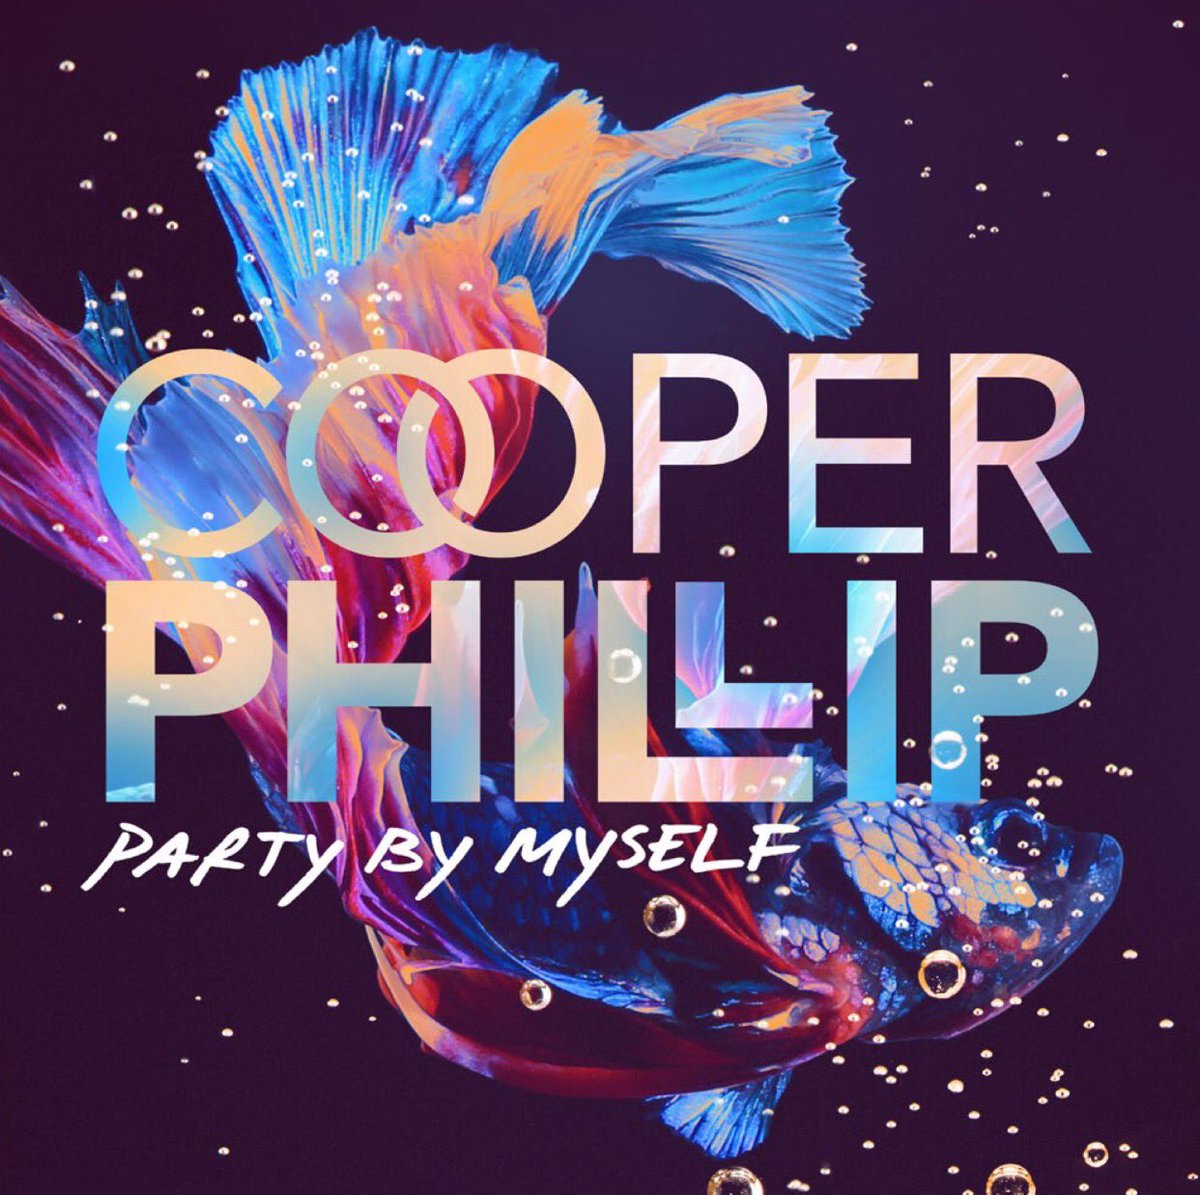 Cooper Phillip - Party By Myself